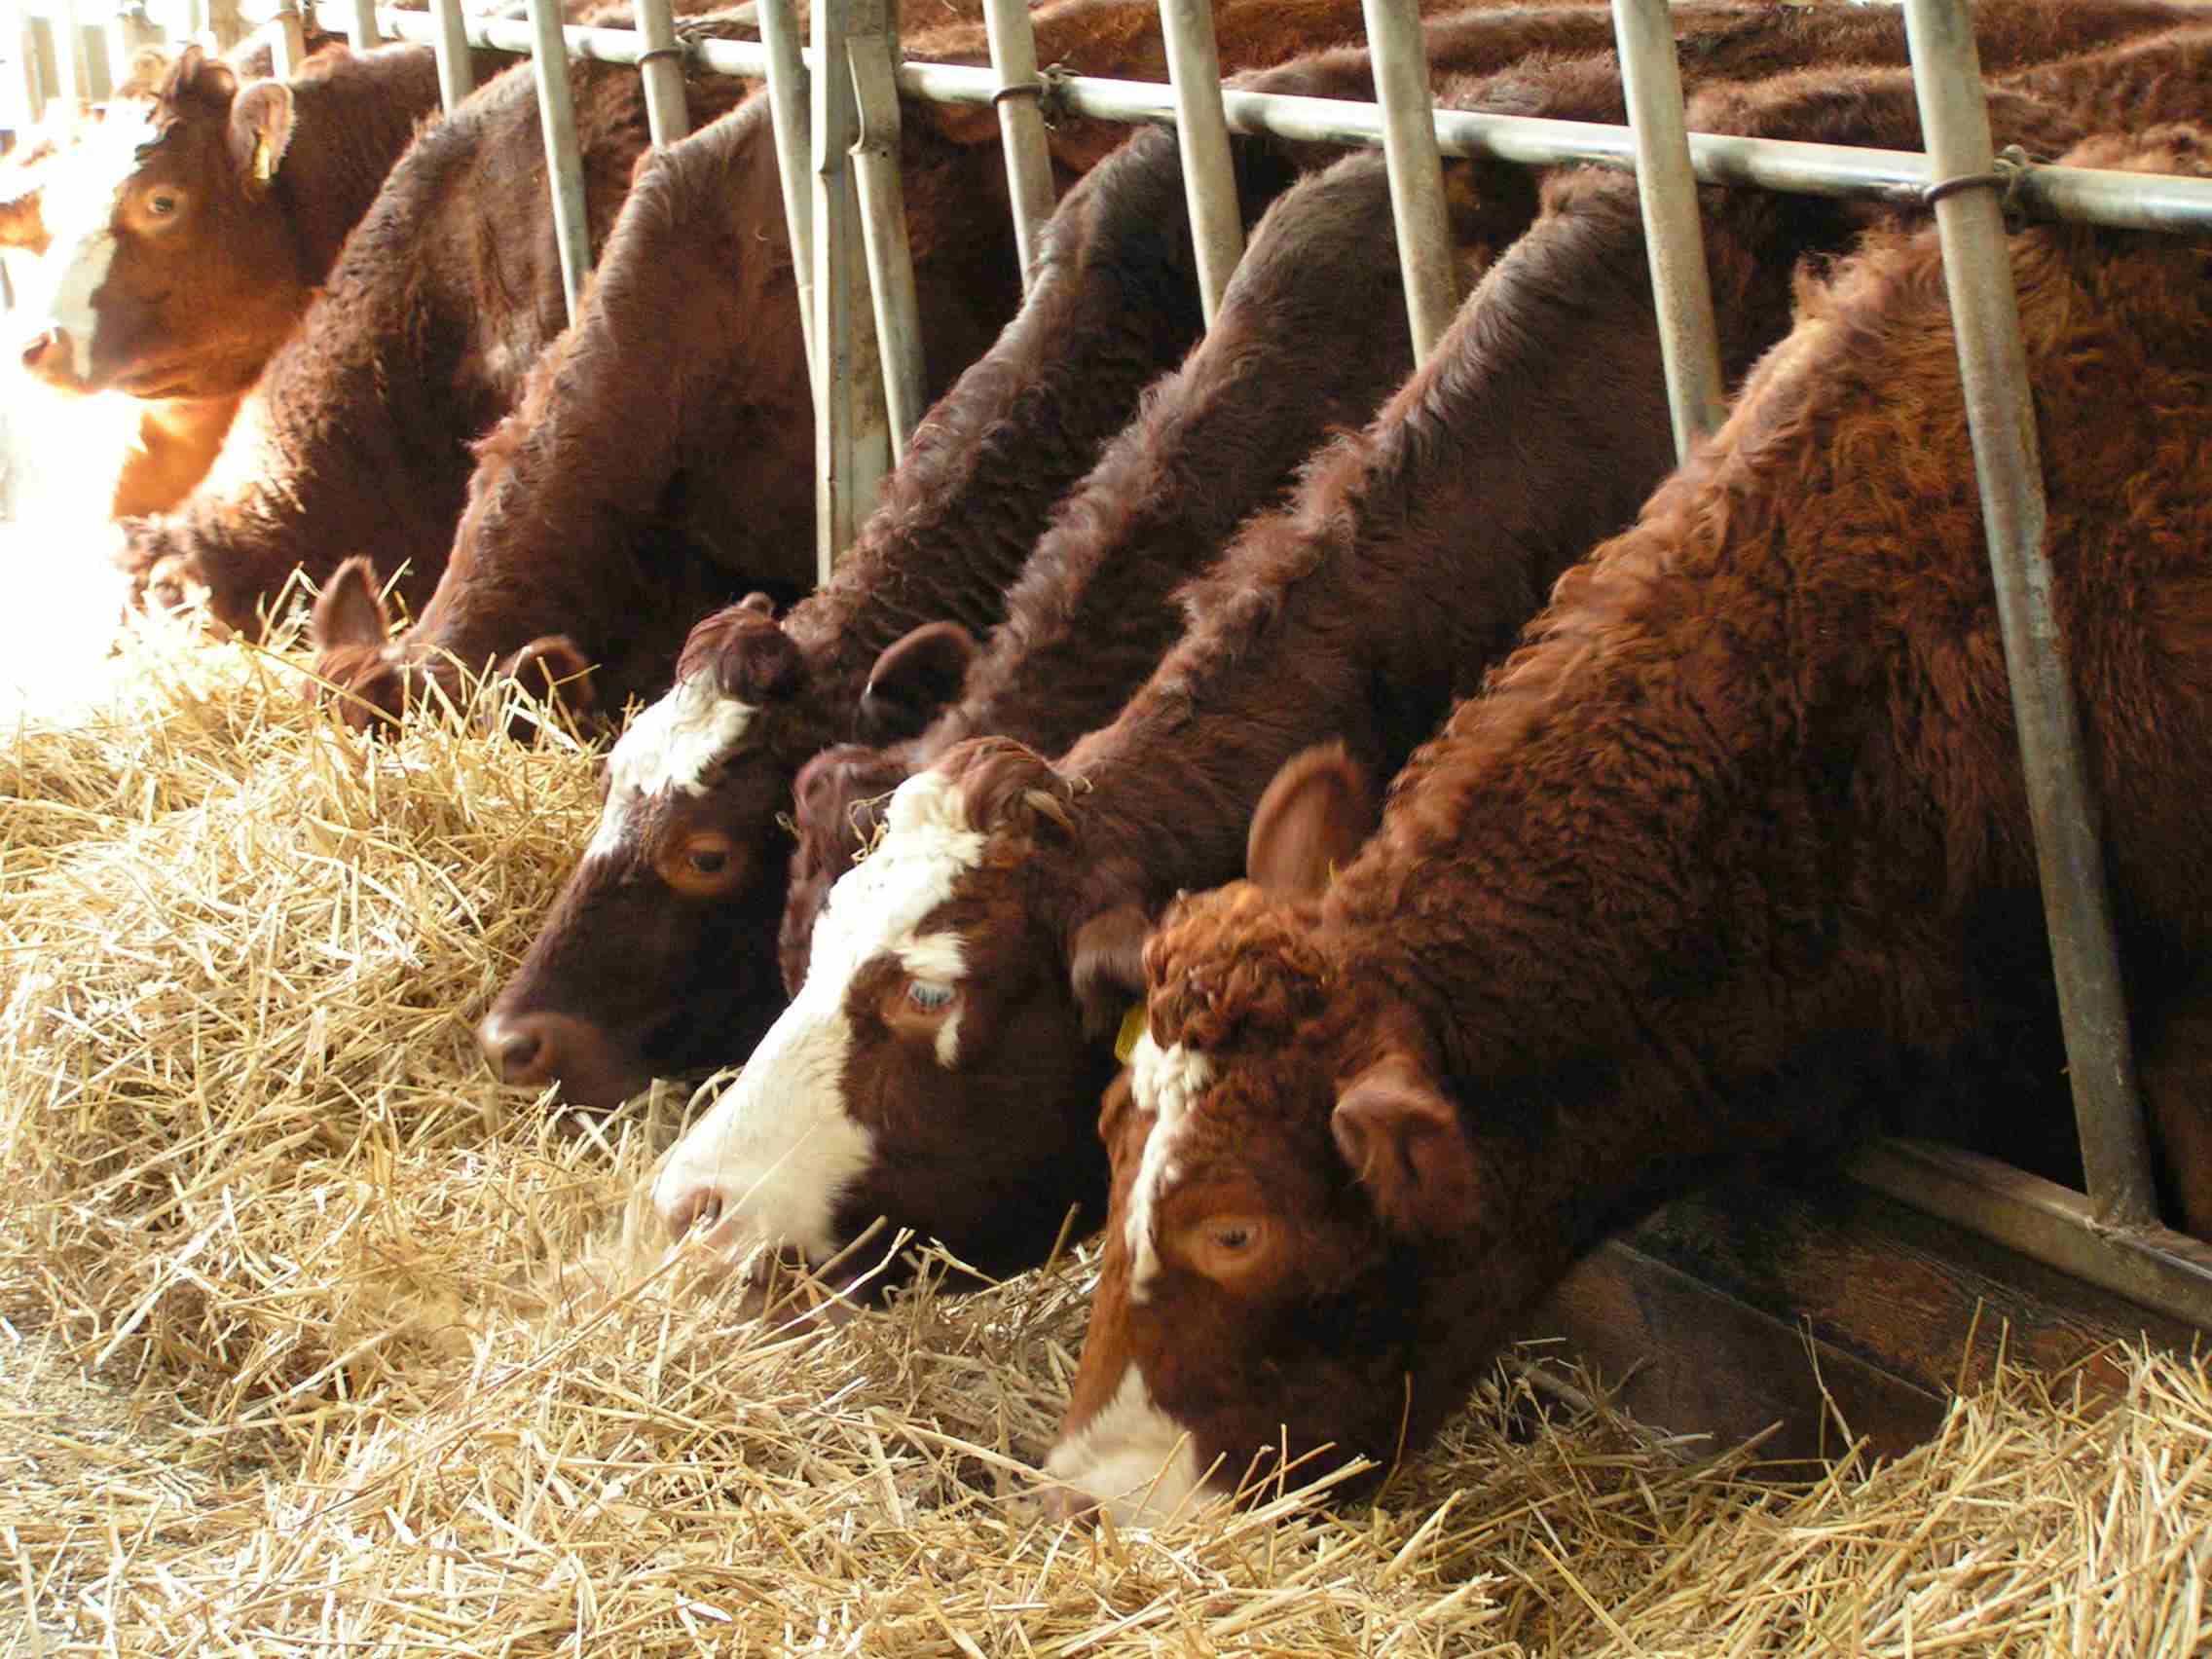 a group of cows eating hay